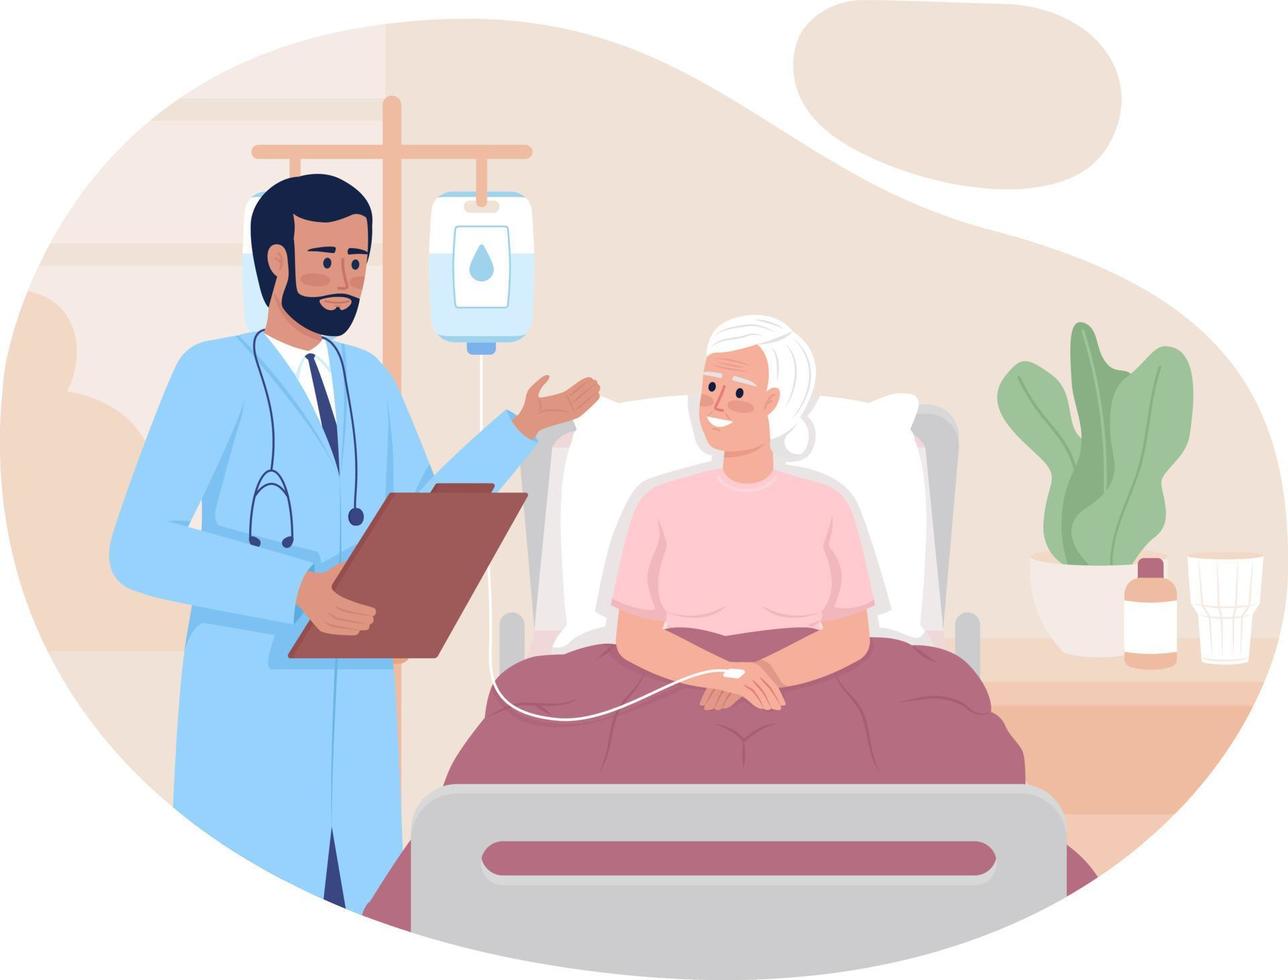 Therapist examining old patient in hospital 2D vector isolated illustration. Treatment flat characters on cartoon background. Health colourful editable scene for mobile, website, presentation